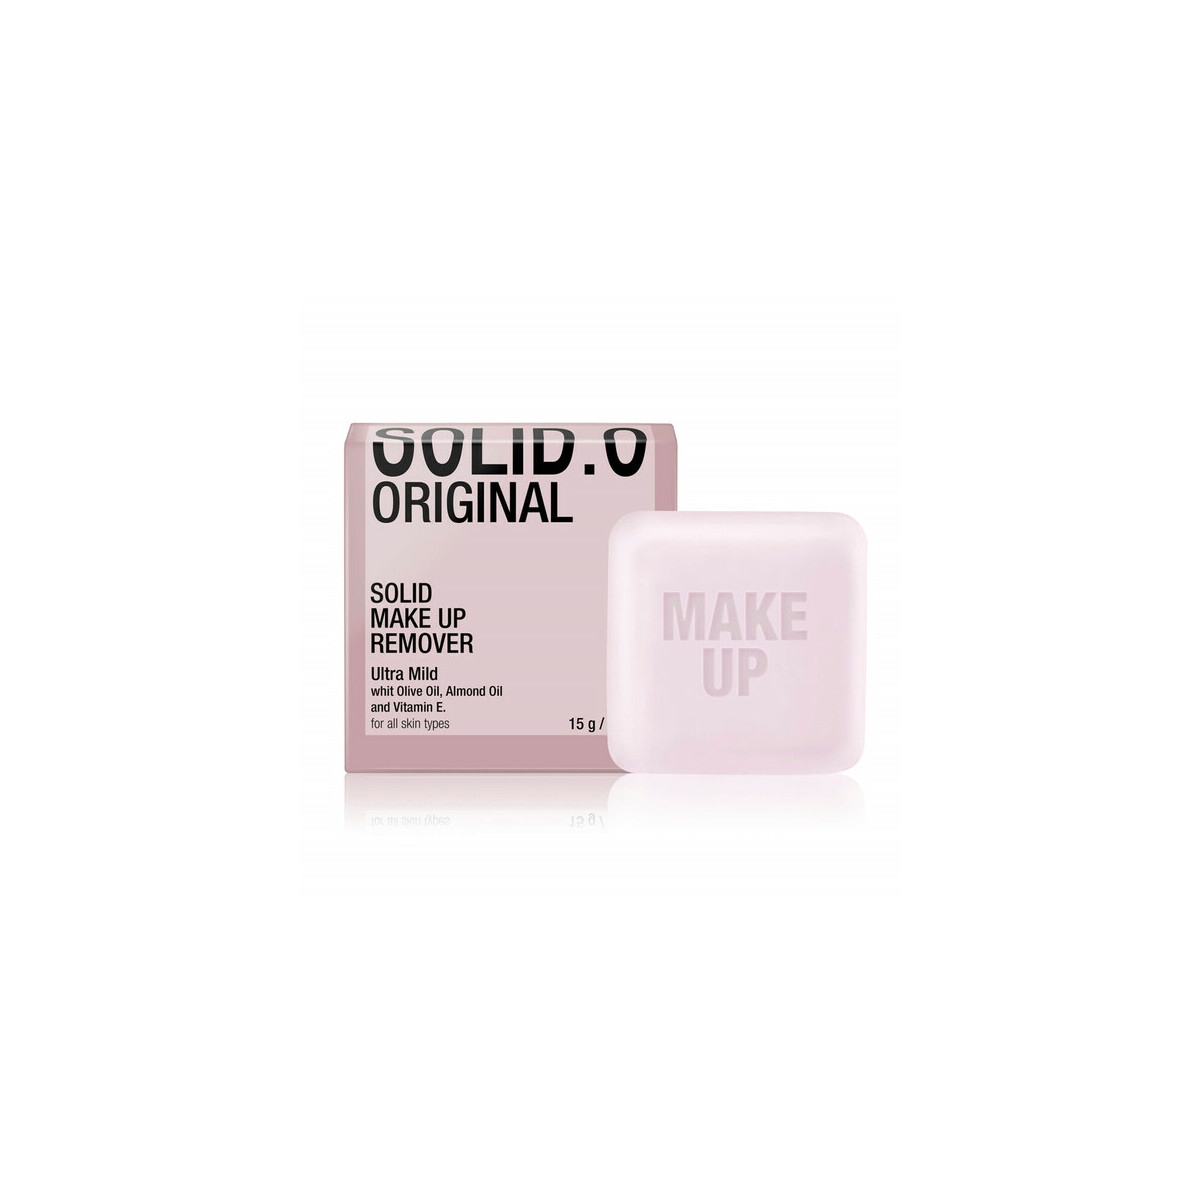 Solid makeup remover 15g